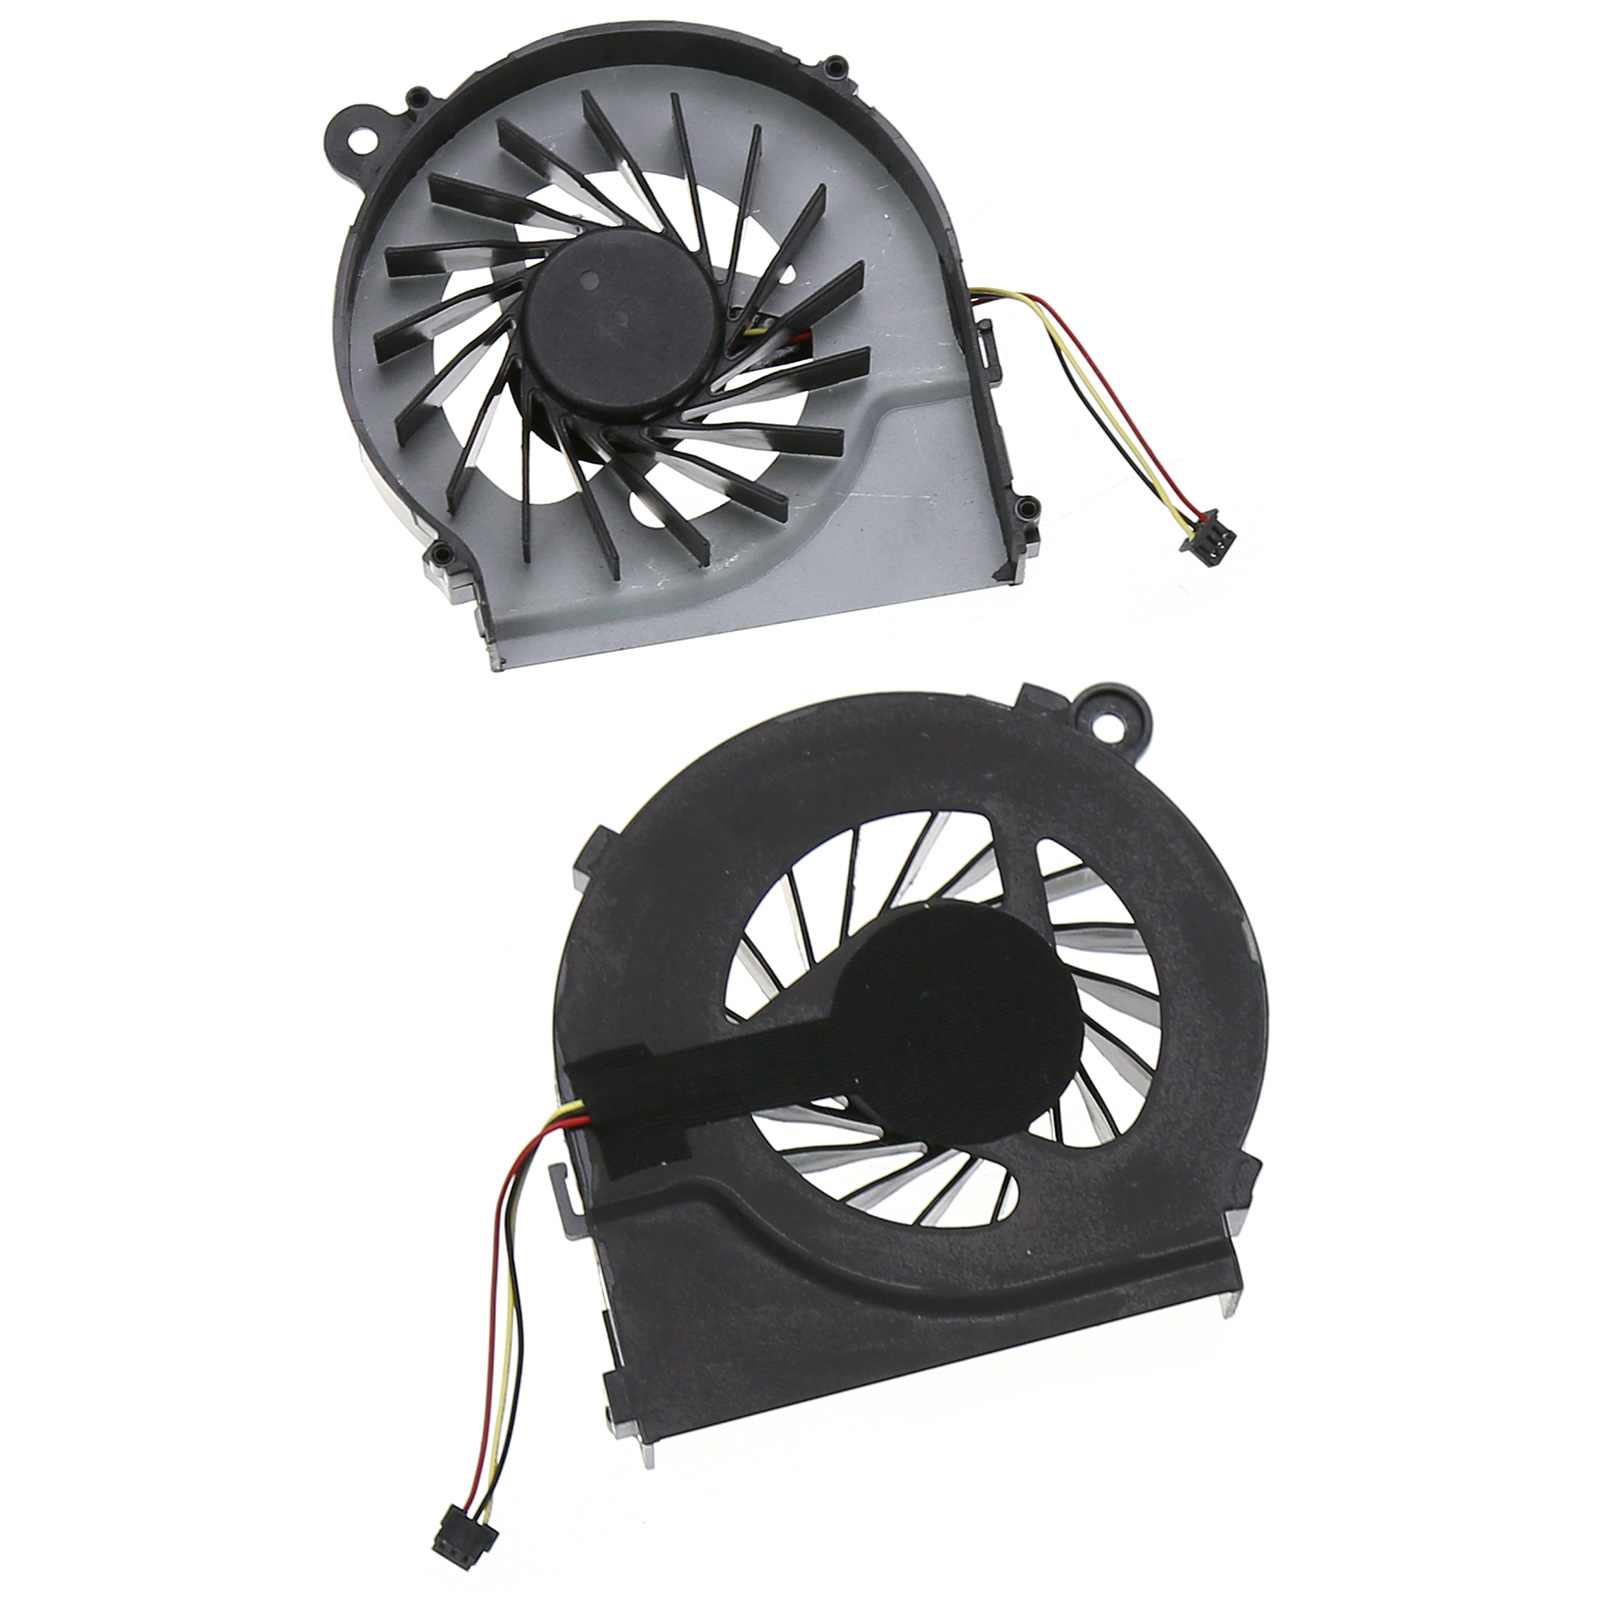 New High quality Laptop CPU Cooler Cooling Fan 646578-001 KSB06105HA For HP Pavilion G7 G4 free shipping